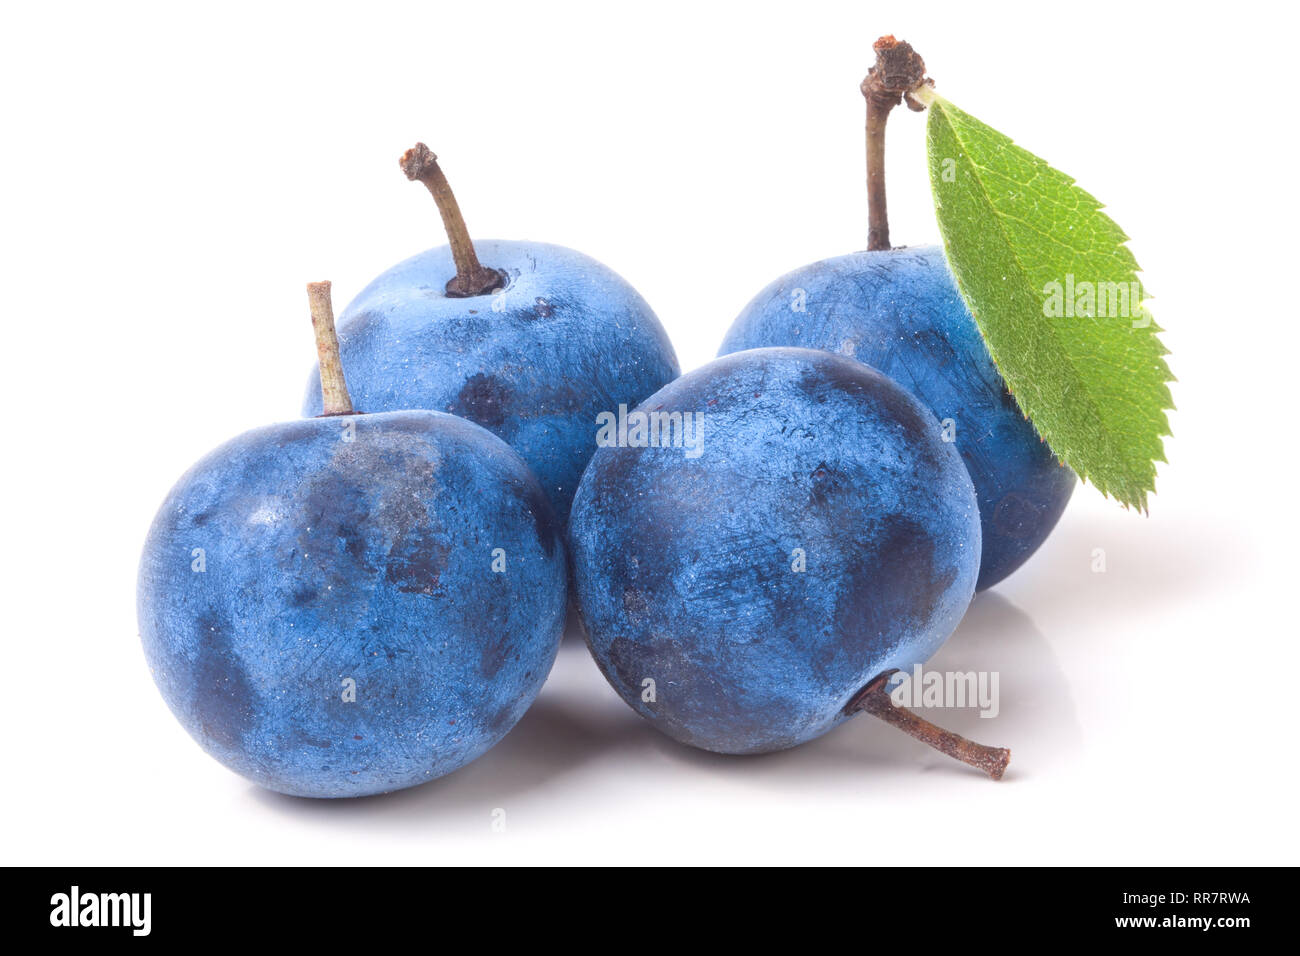 fresh blackthorn berries with leaves isolated on white background Stock Photo